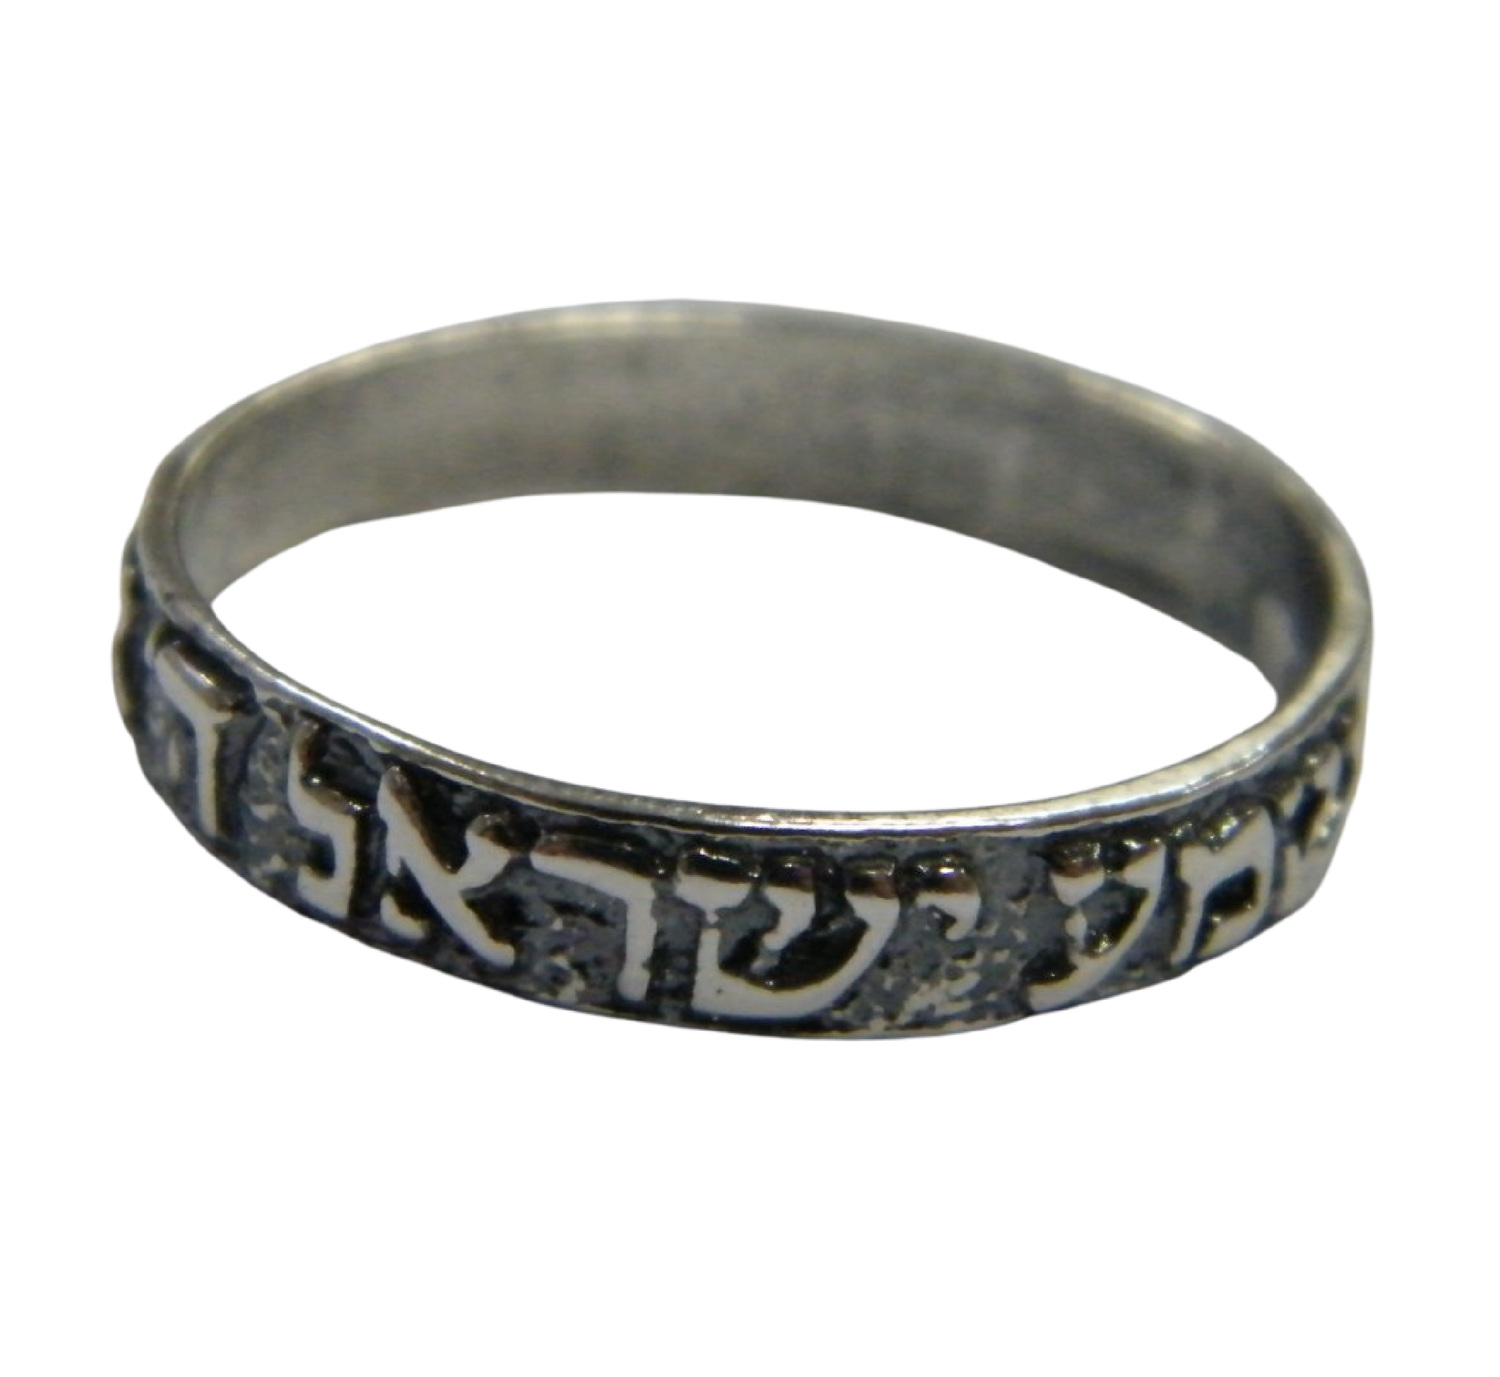 Bluenoemi Jewelry Rings Hebrew Bible Verse Shema Israel Hear Oh israel G-D is Our G-D is One Judaica Jewish sterling silver ring